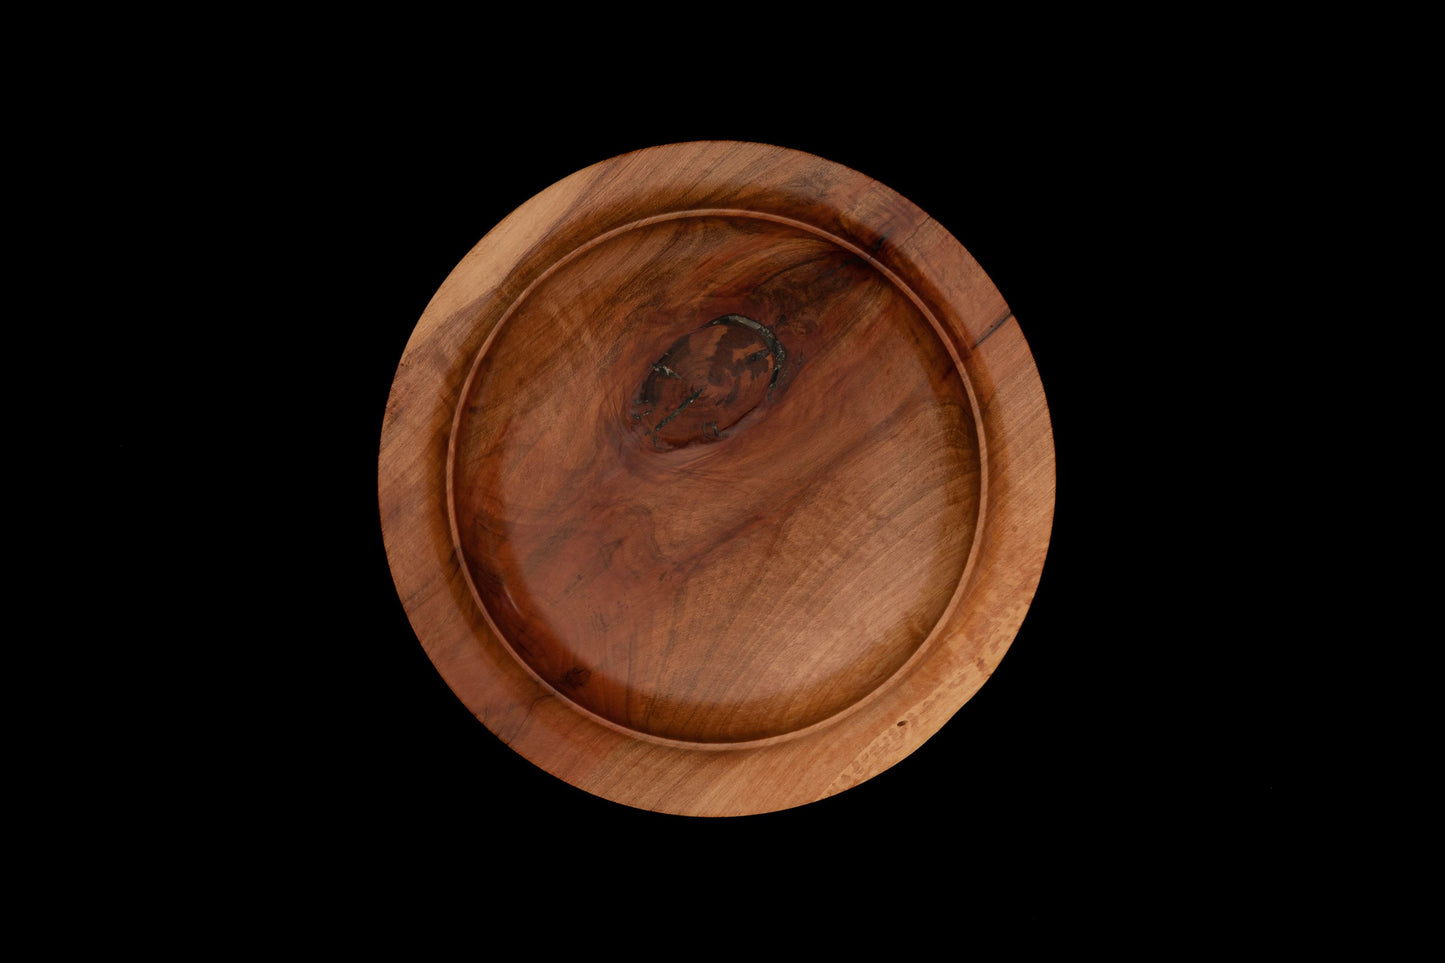 Wooden Bowl by Mark Russell - Tawhairauriki (Black Beech) No332